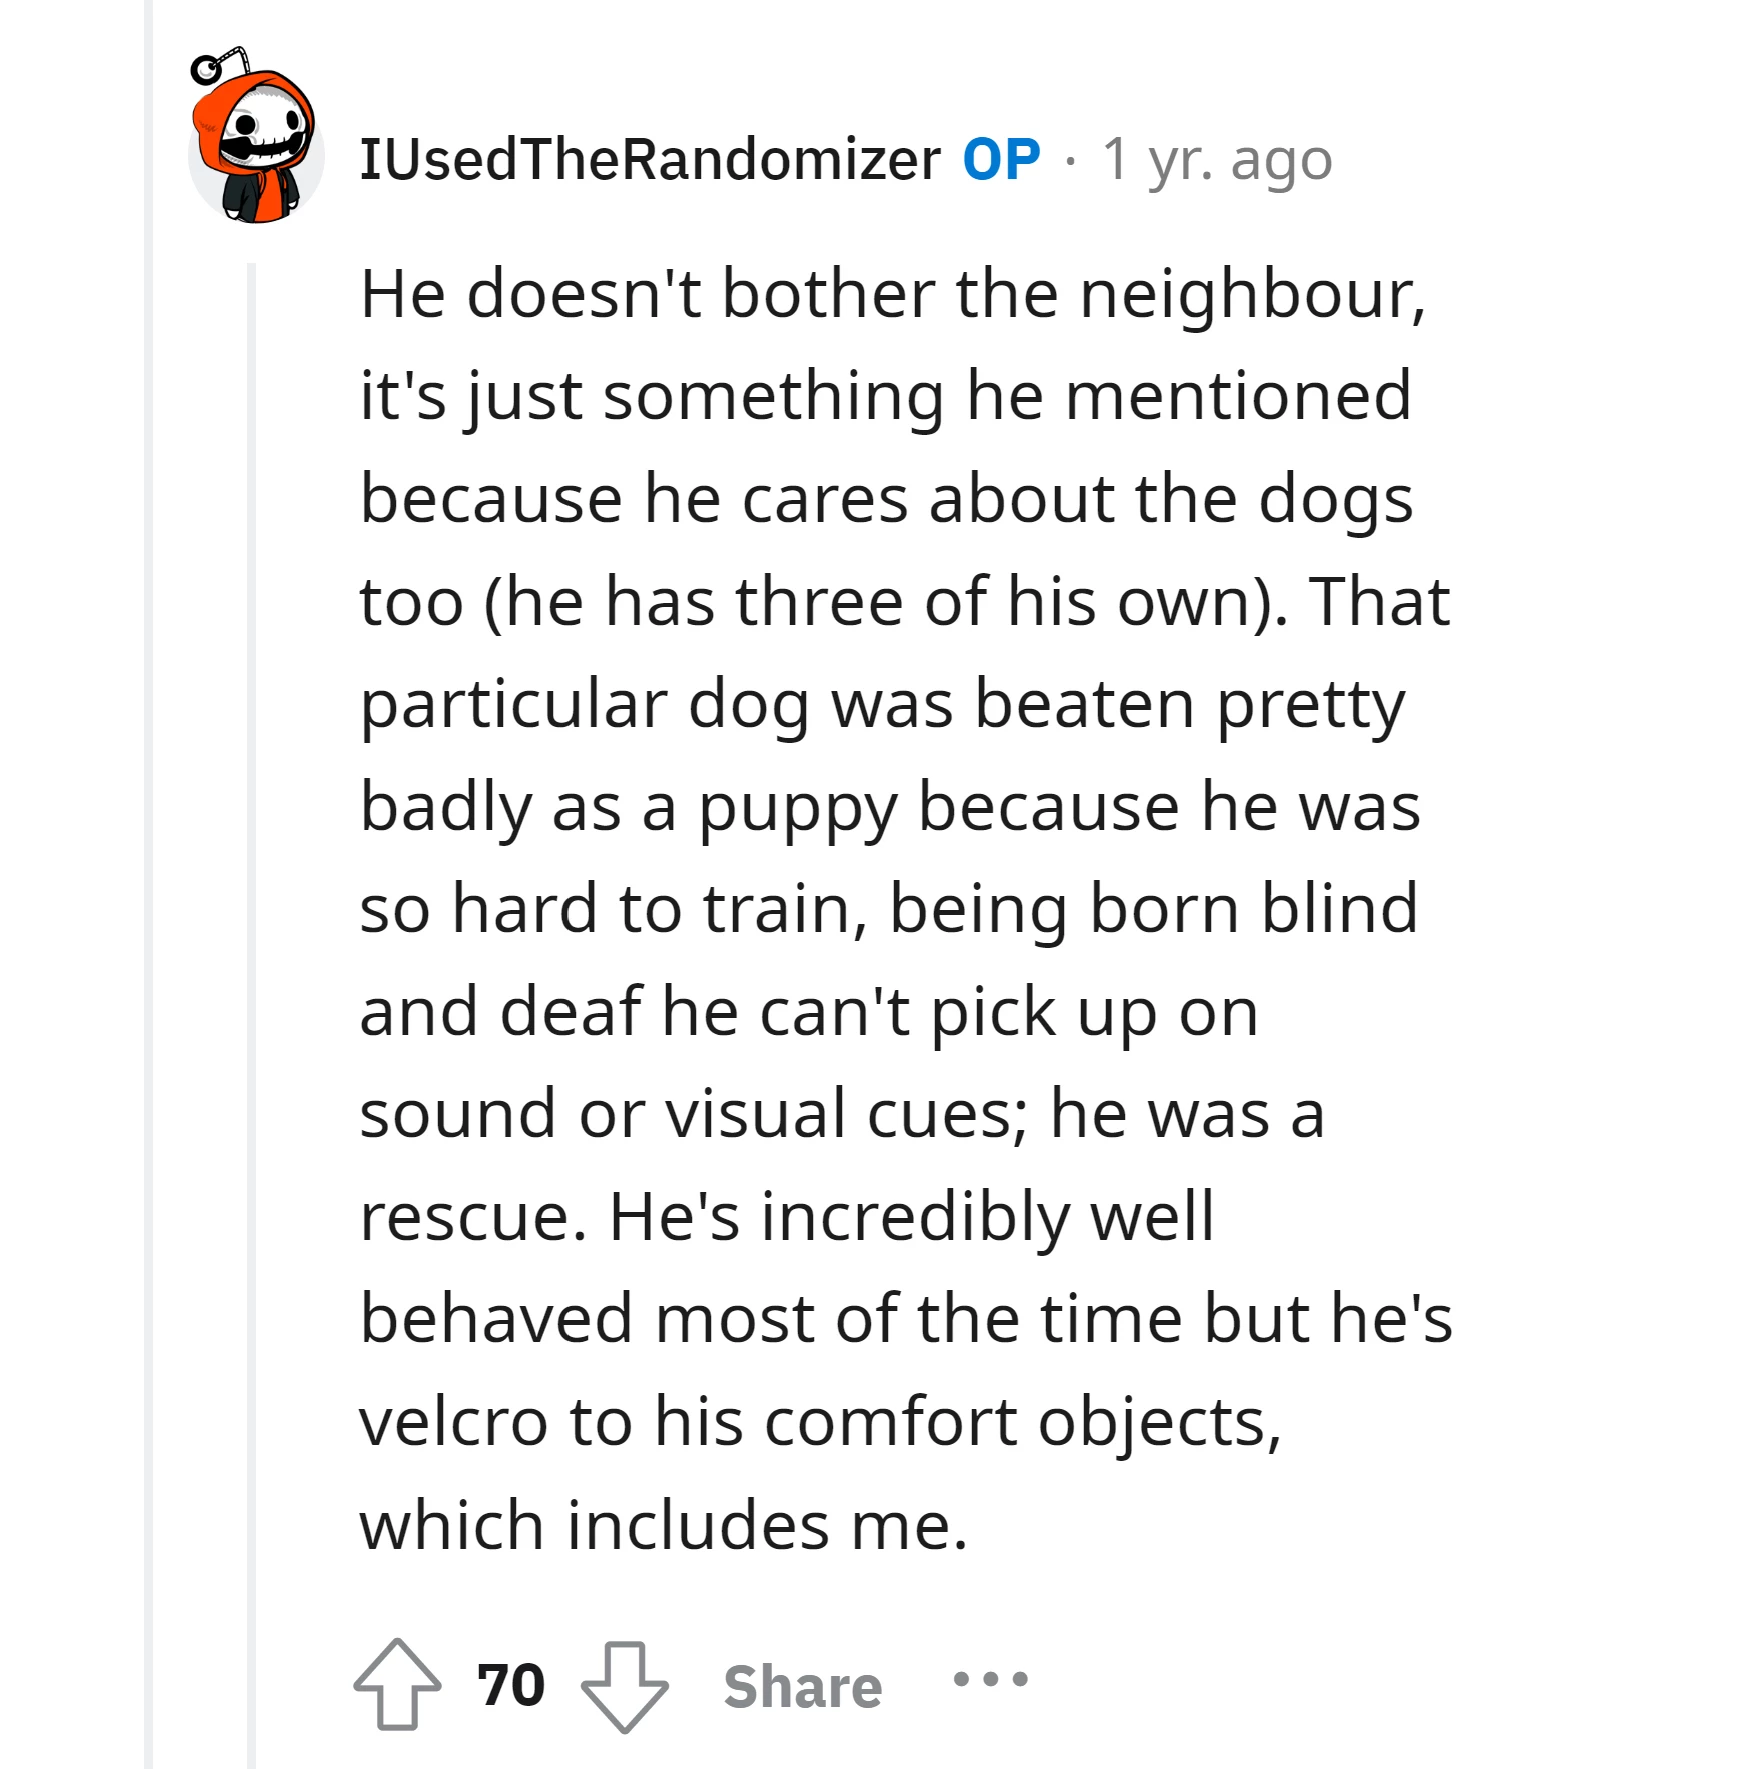 Now we know why OP cares so much for his pets